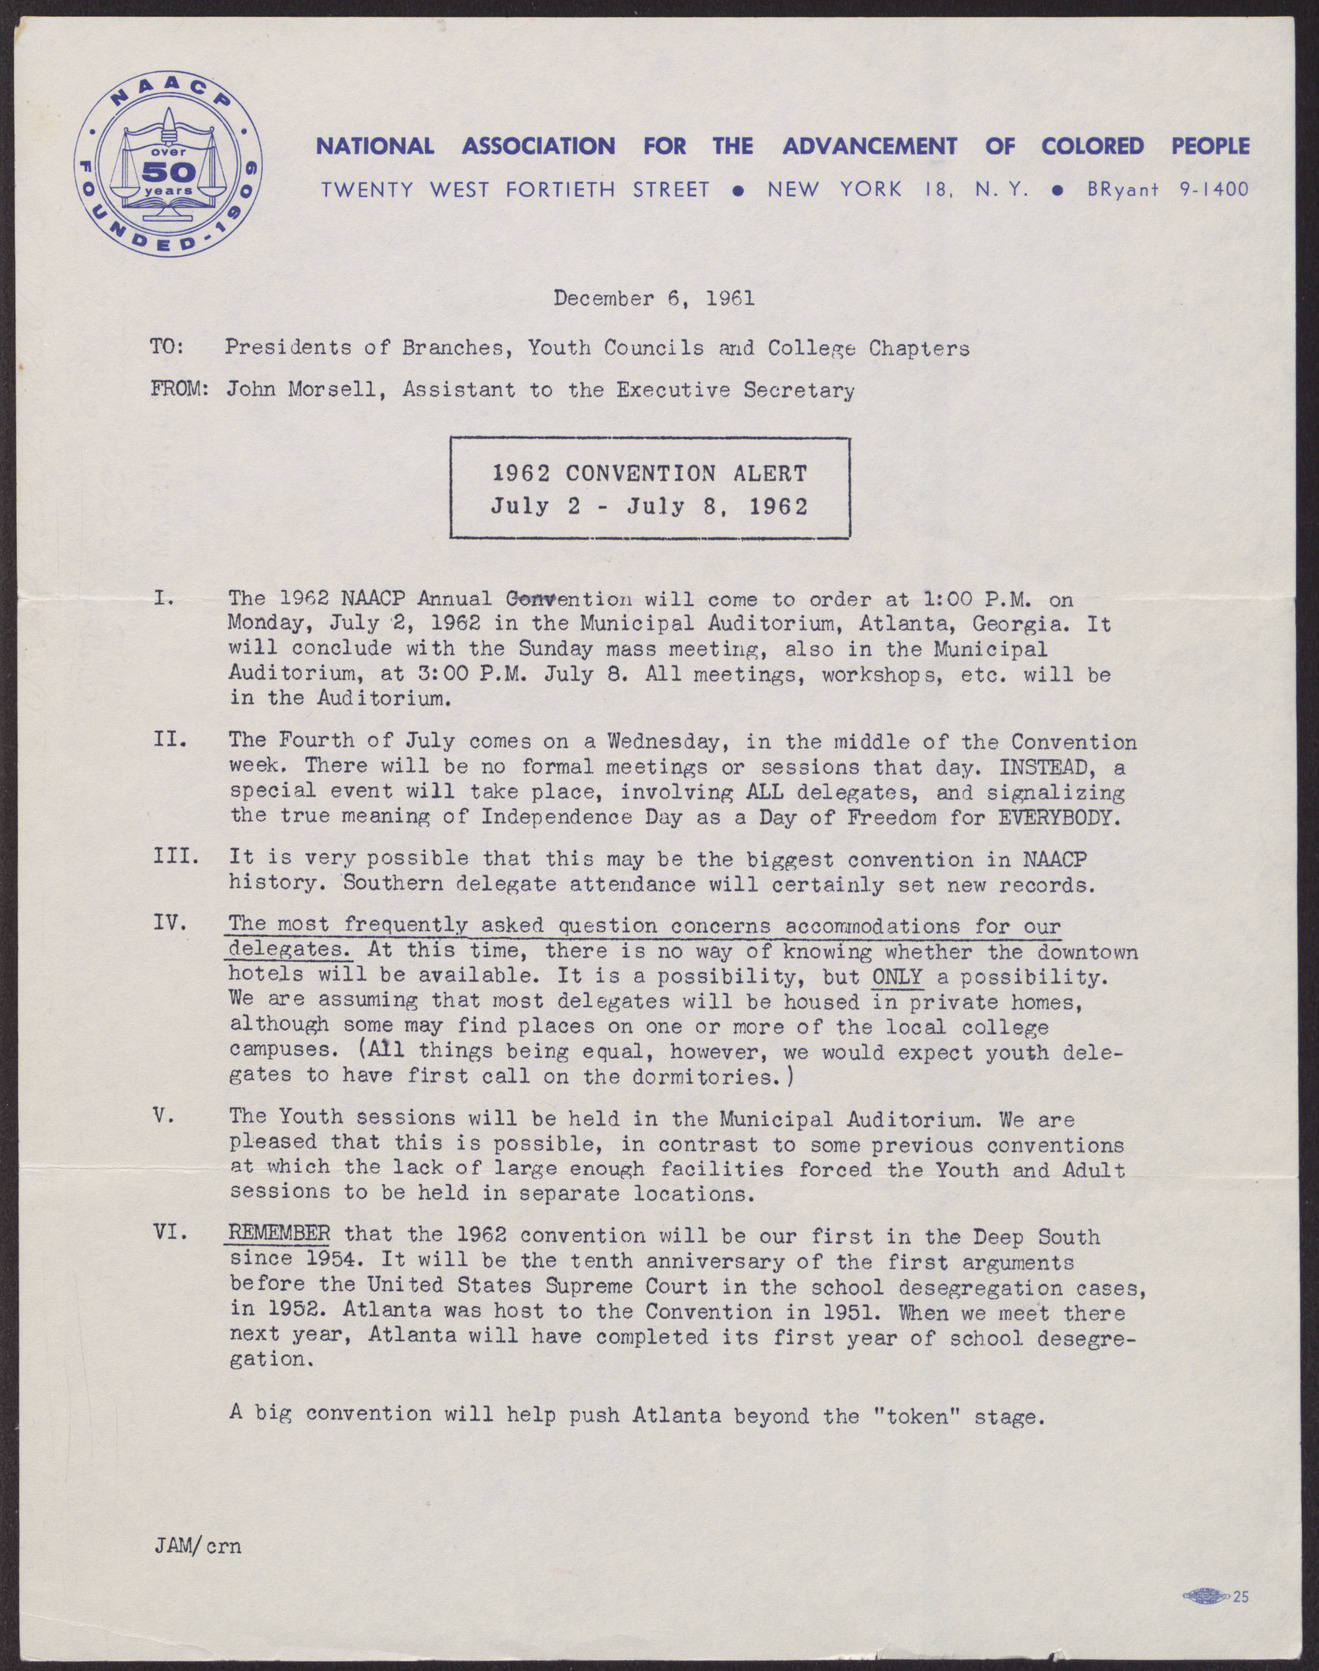 Letter to Presidents of NAACP Branches, Youth Councils and College Chapter from John Morsell, December 6, 1961